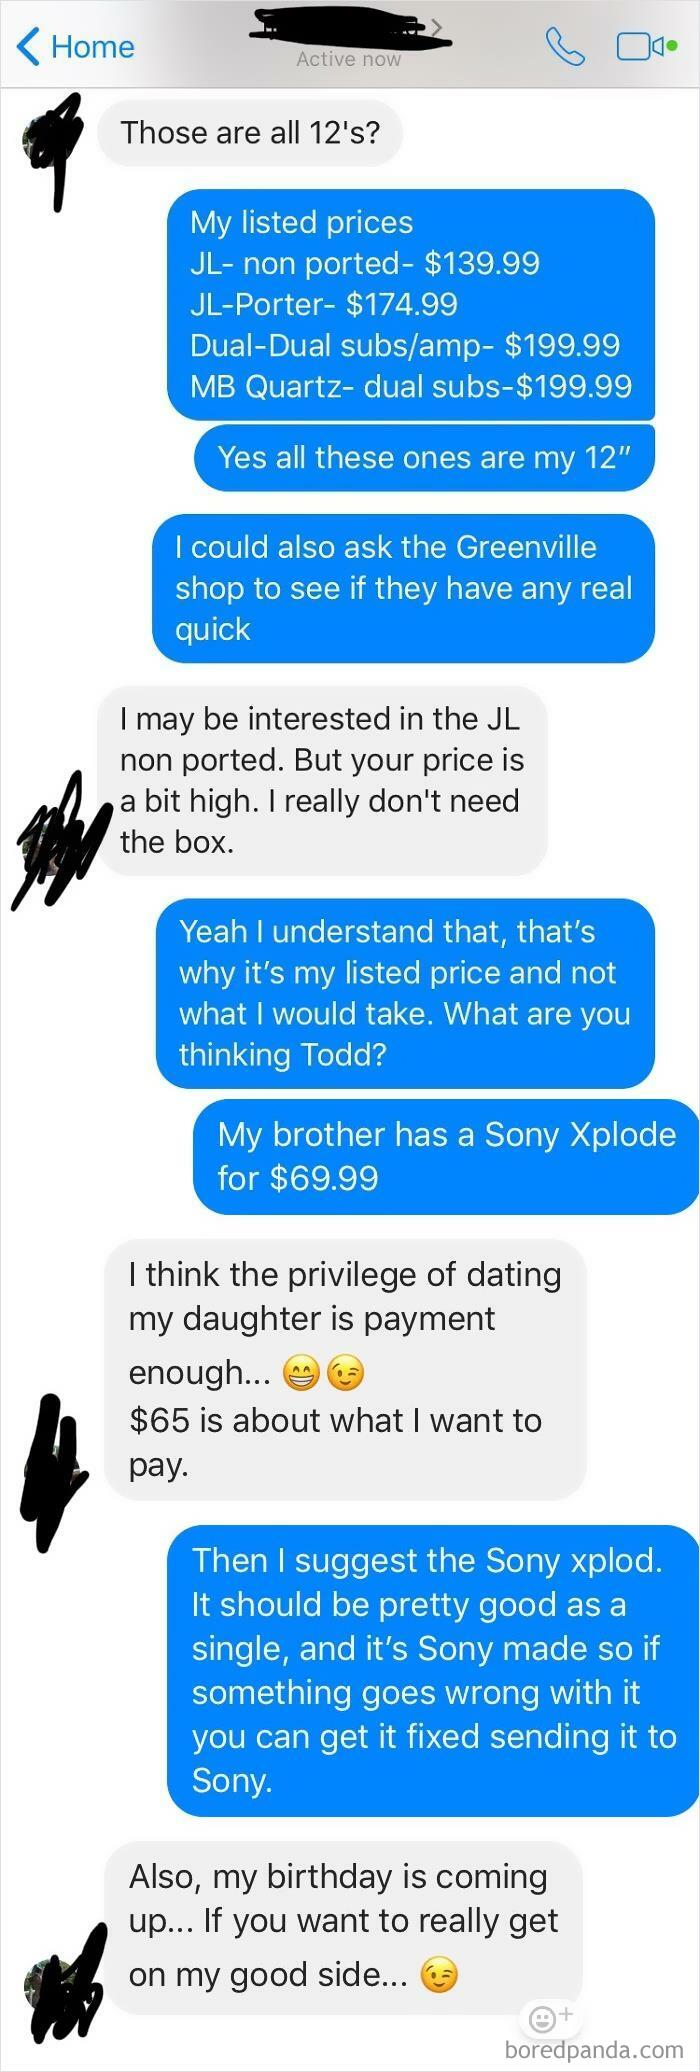 Choosing Beggar, Girlfriends Dad. (Brother And I Both Own Second Hand Shops)